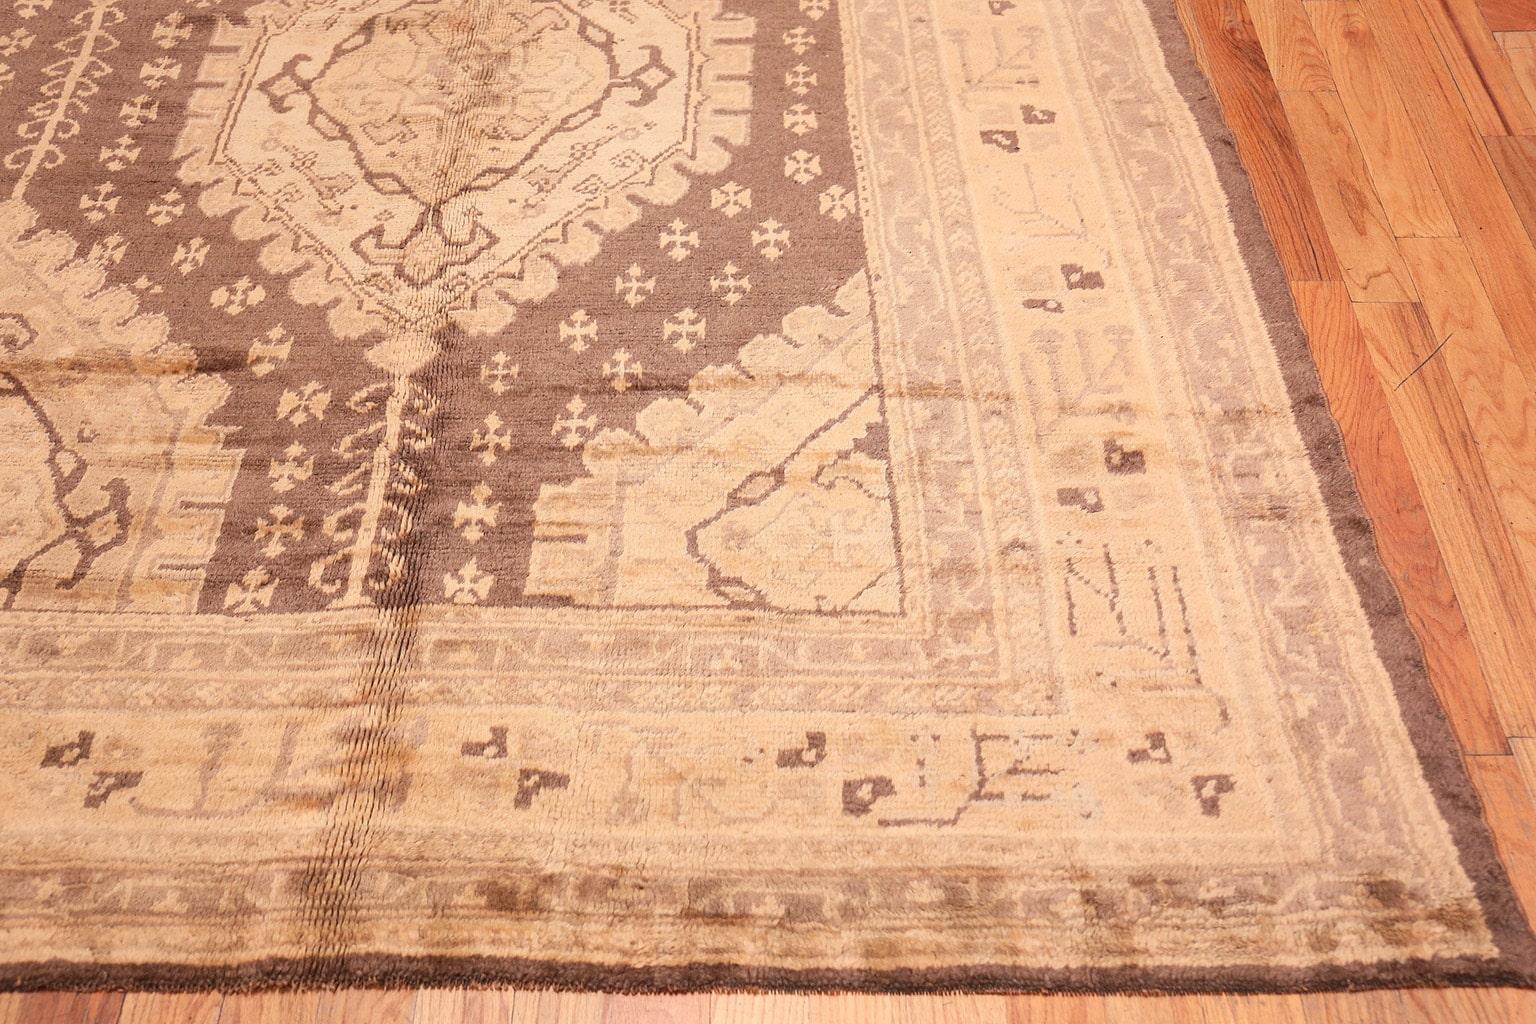 Hand-Knotted Decorative Large Antique Turkish Oushak Rug. Size: 10 ft 9 in x 14 ft